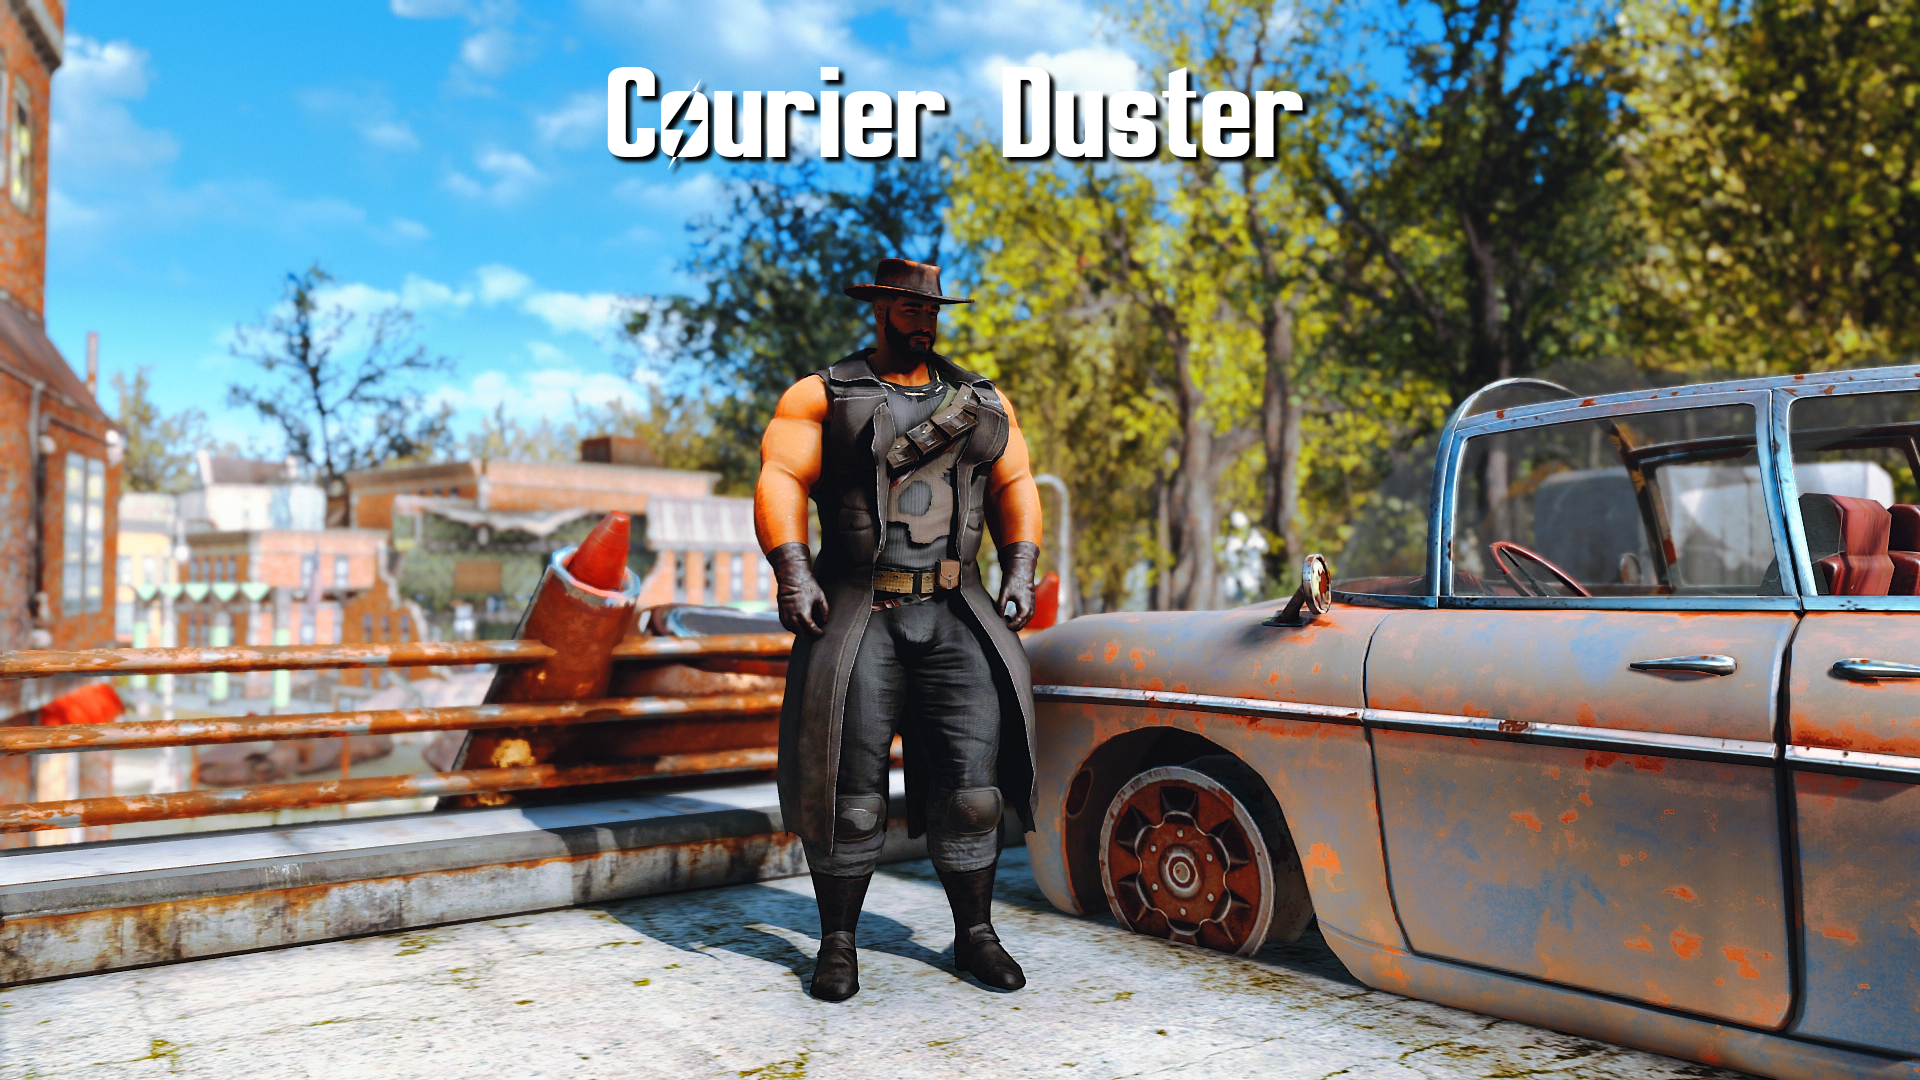 Courier Duster for Atomic Muscle